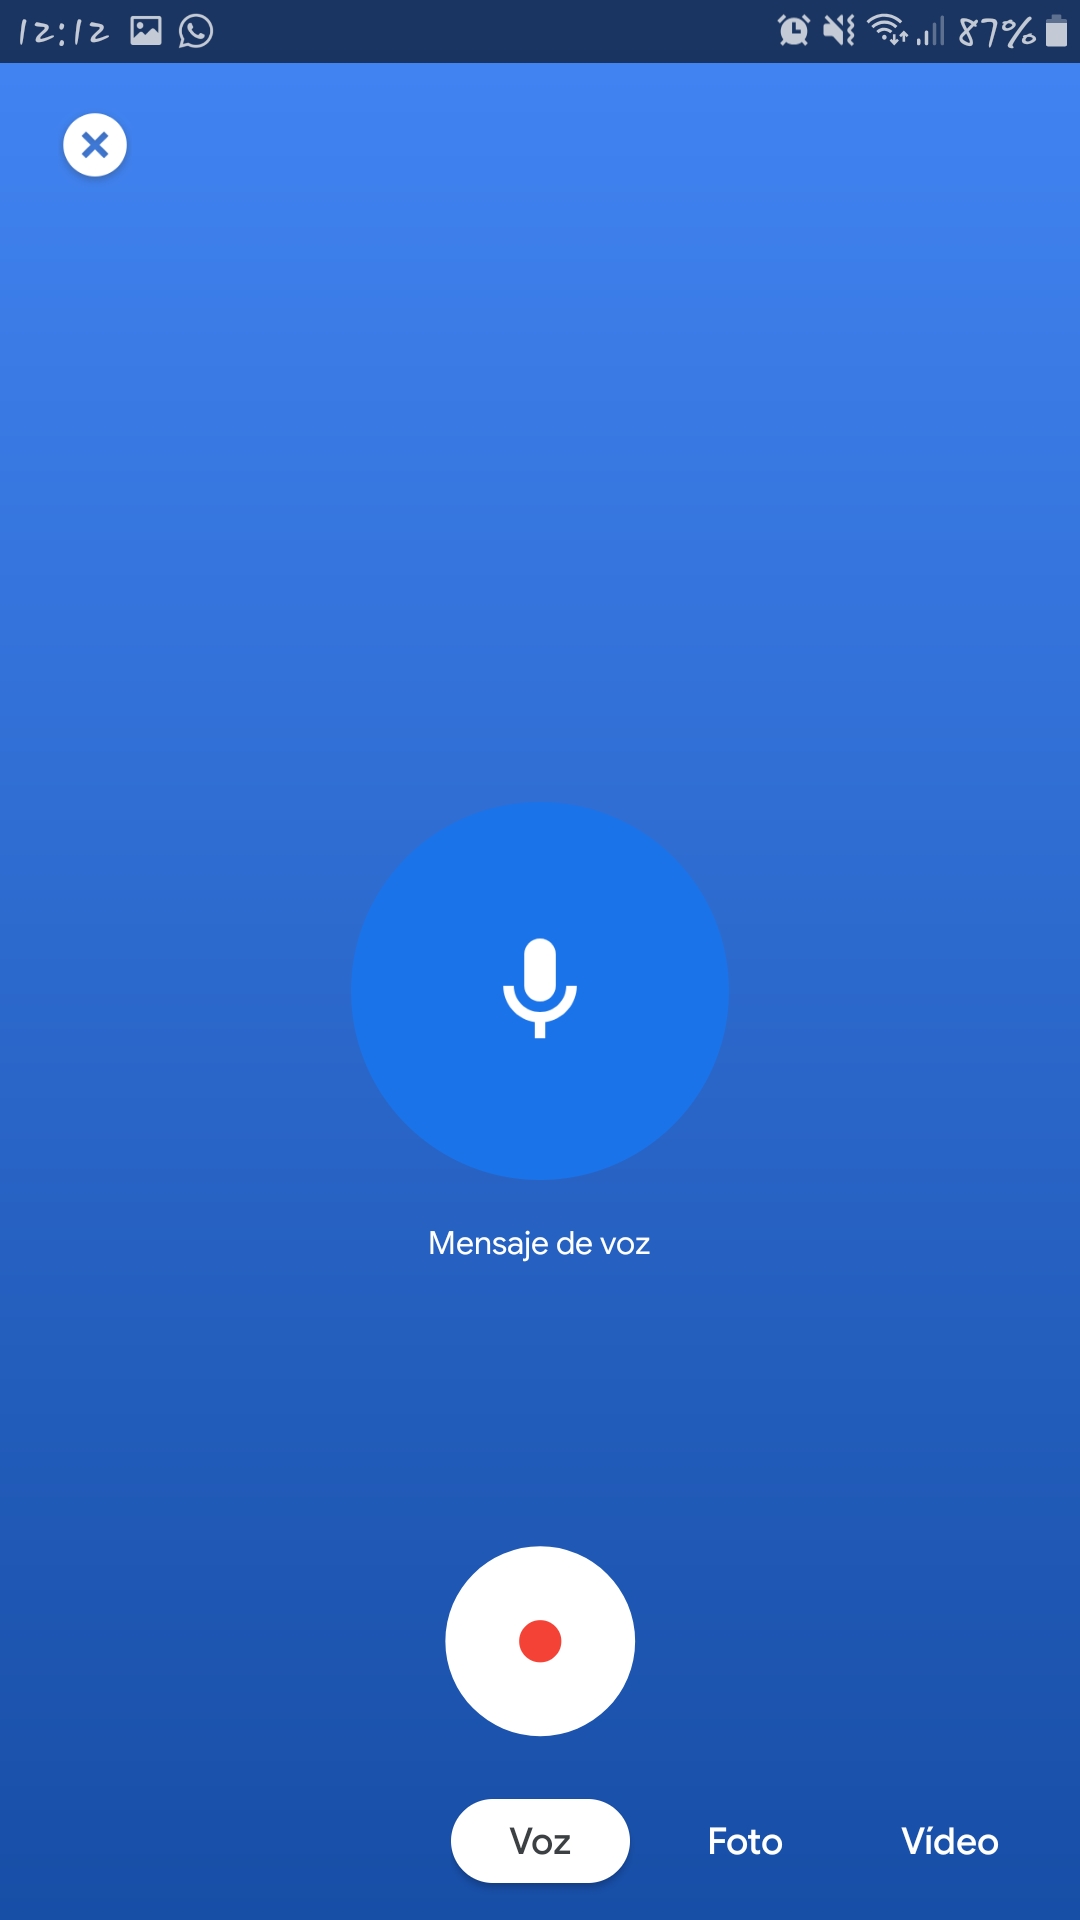 Voice message function